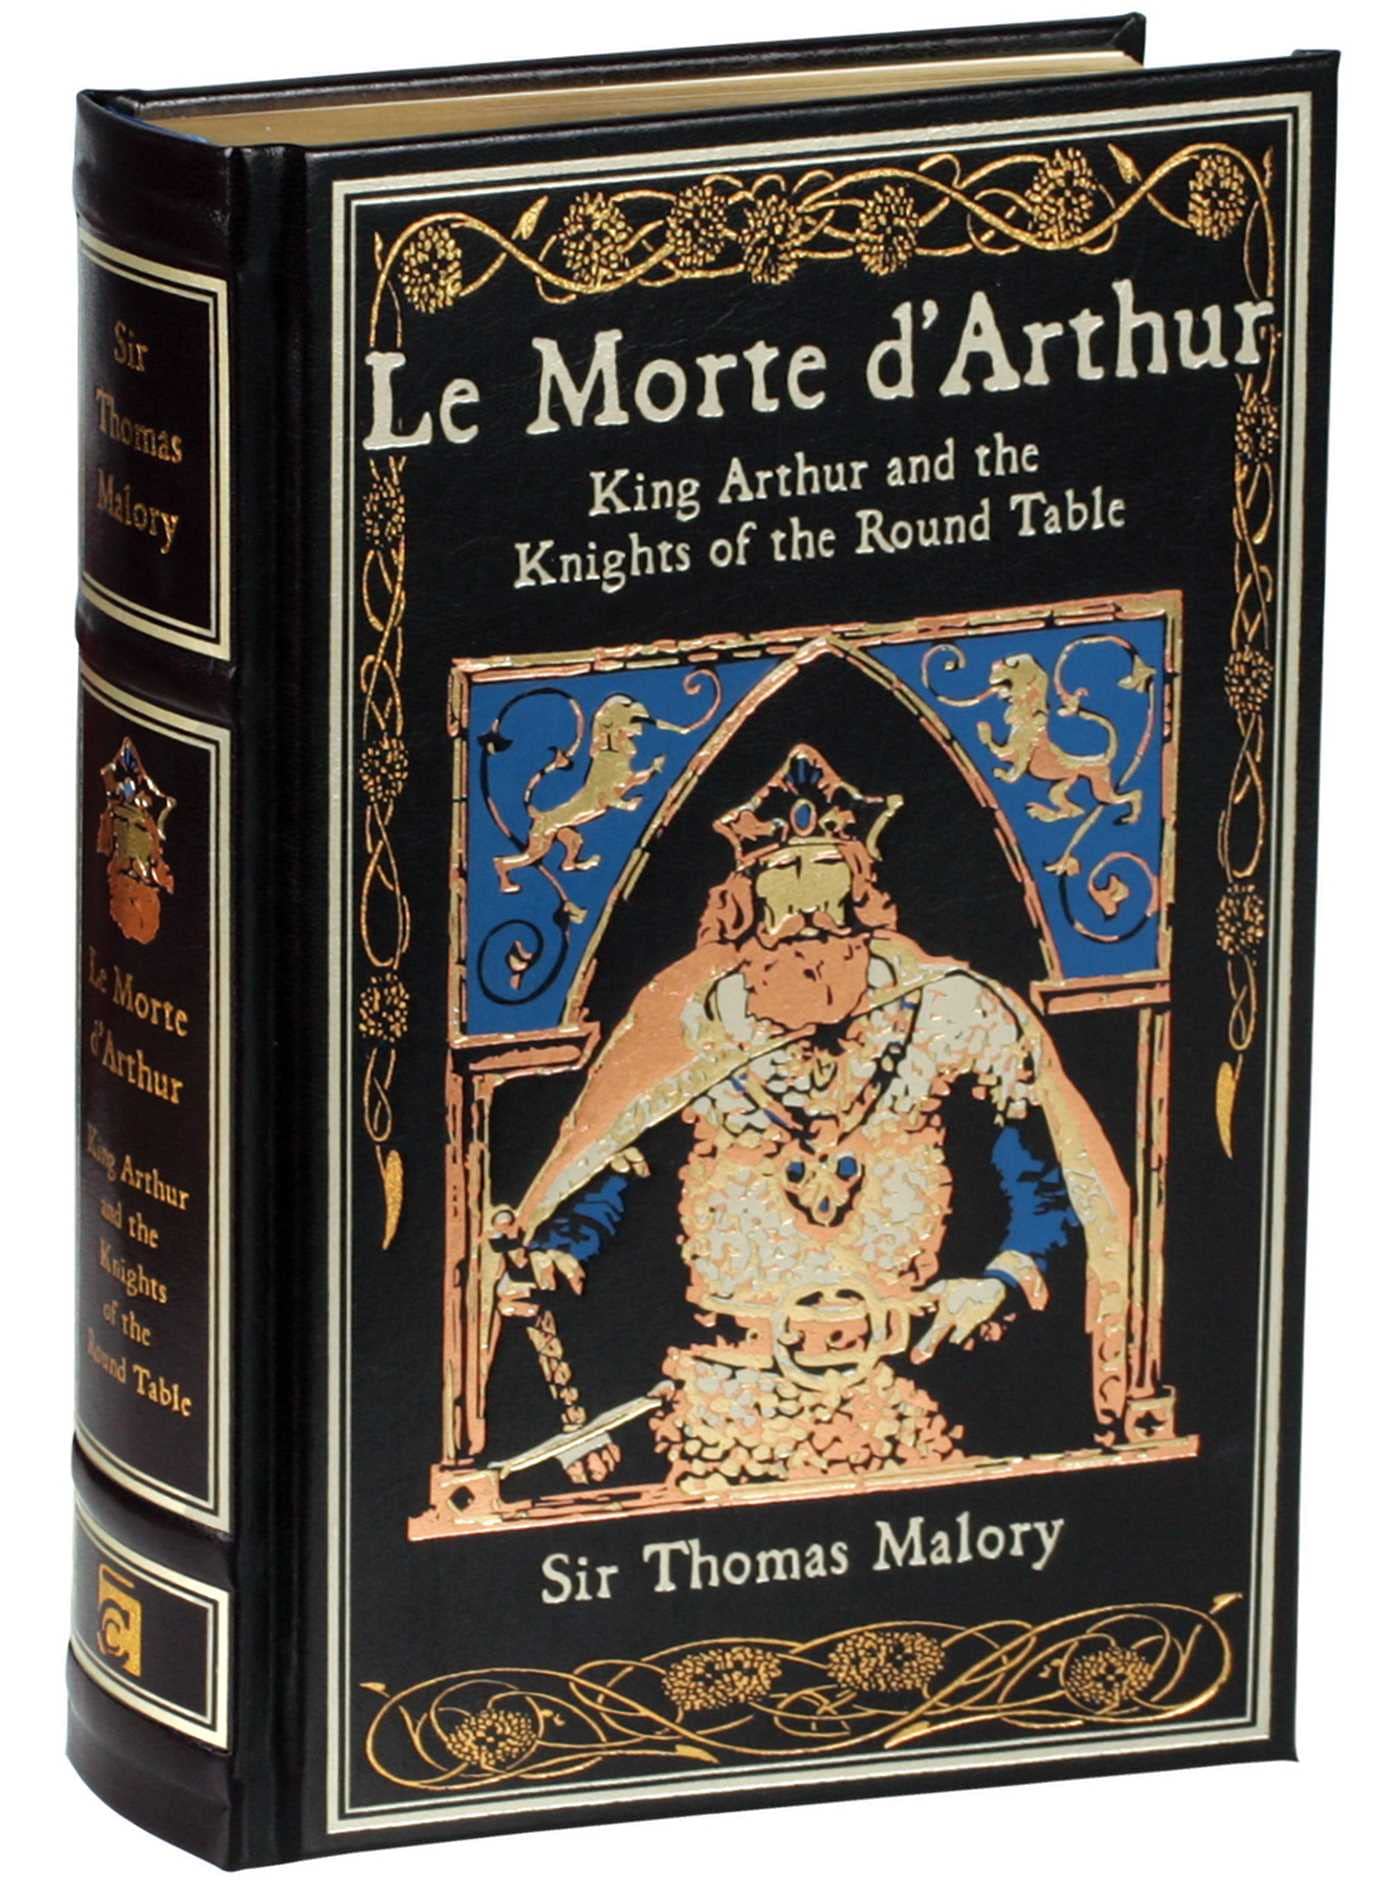 Le Morte d'Arthur : King Arthur and the Knights of the Round Table